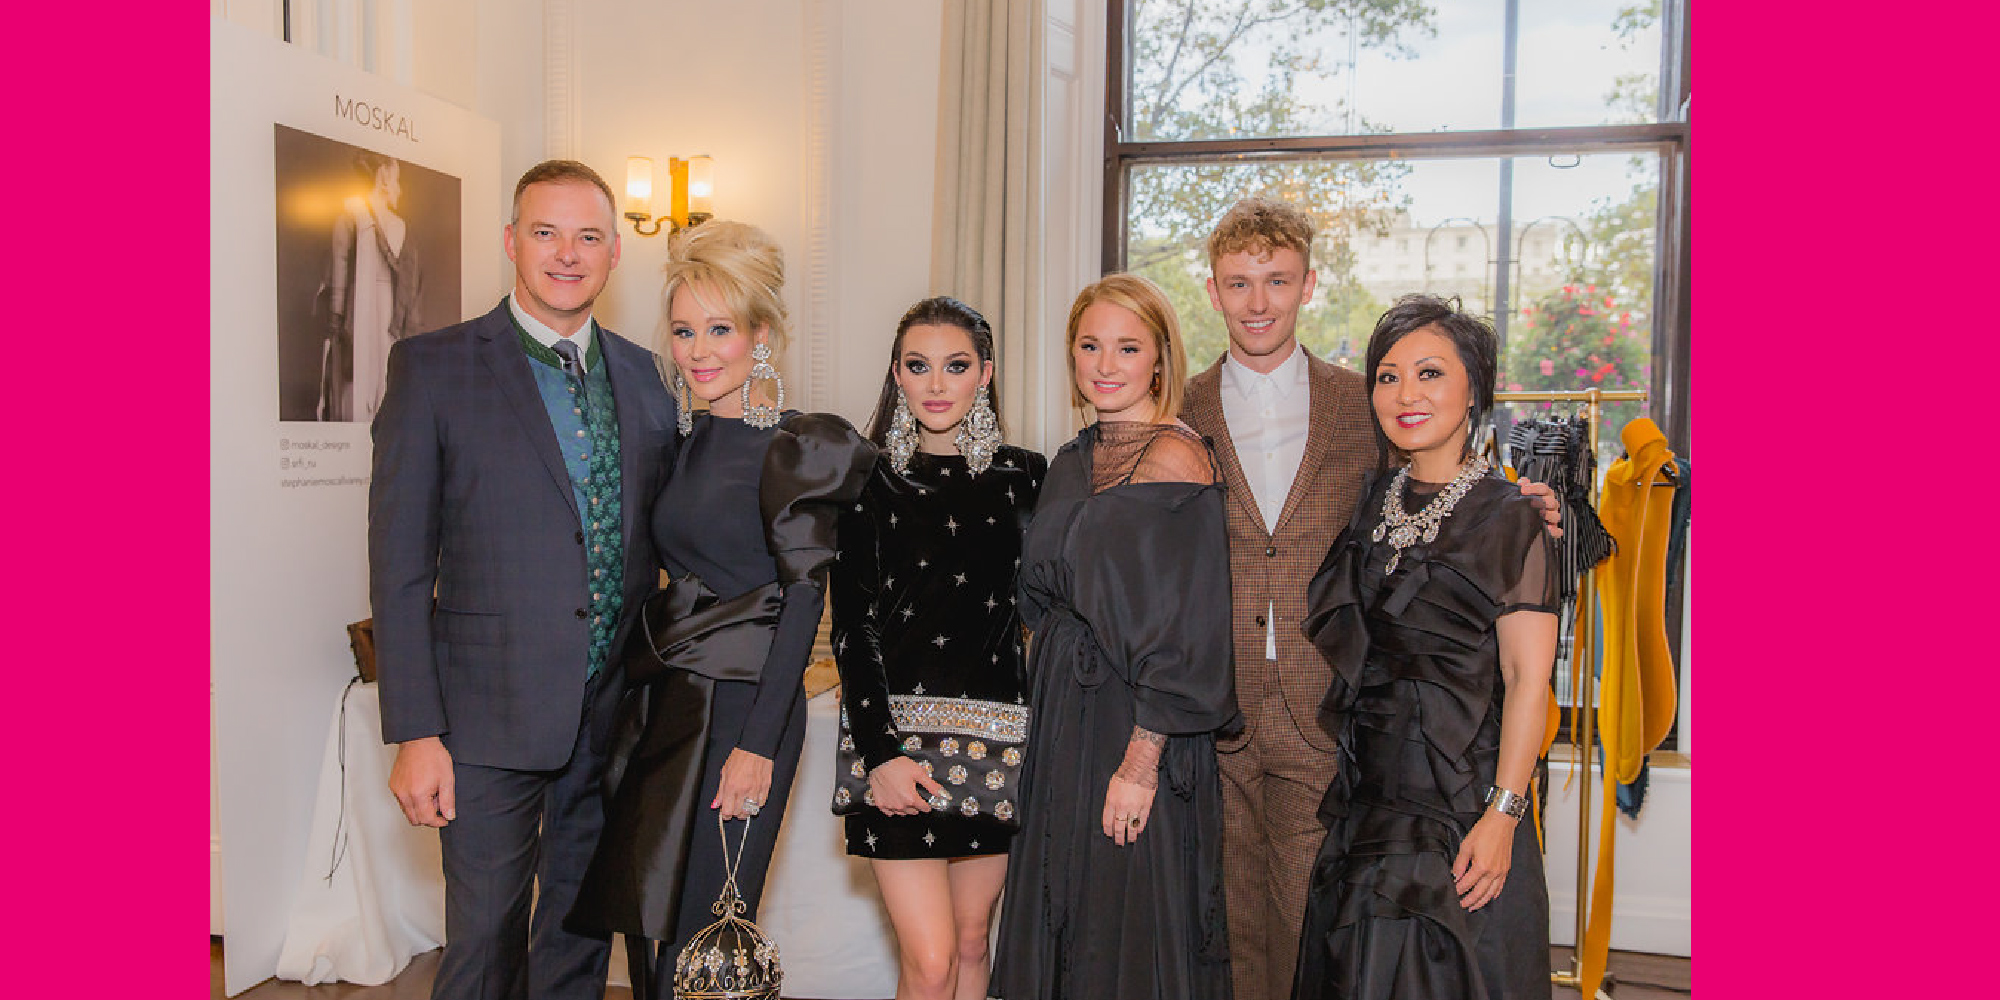 Robert Ott, Suzanne Rogers, Chloé Rogers, Stephanie Moscall-Varey, Dylan Kwacz, and Susan Langdon in London, United Kingdom after Suzanne Rogers Fashion Institute Fellow, Stephanie Moscall-Varey's exhibit